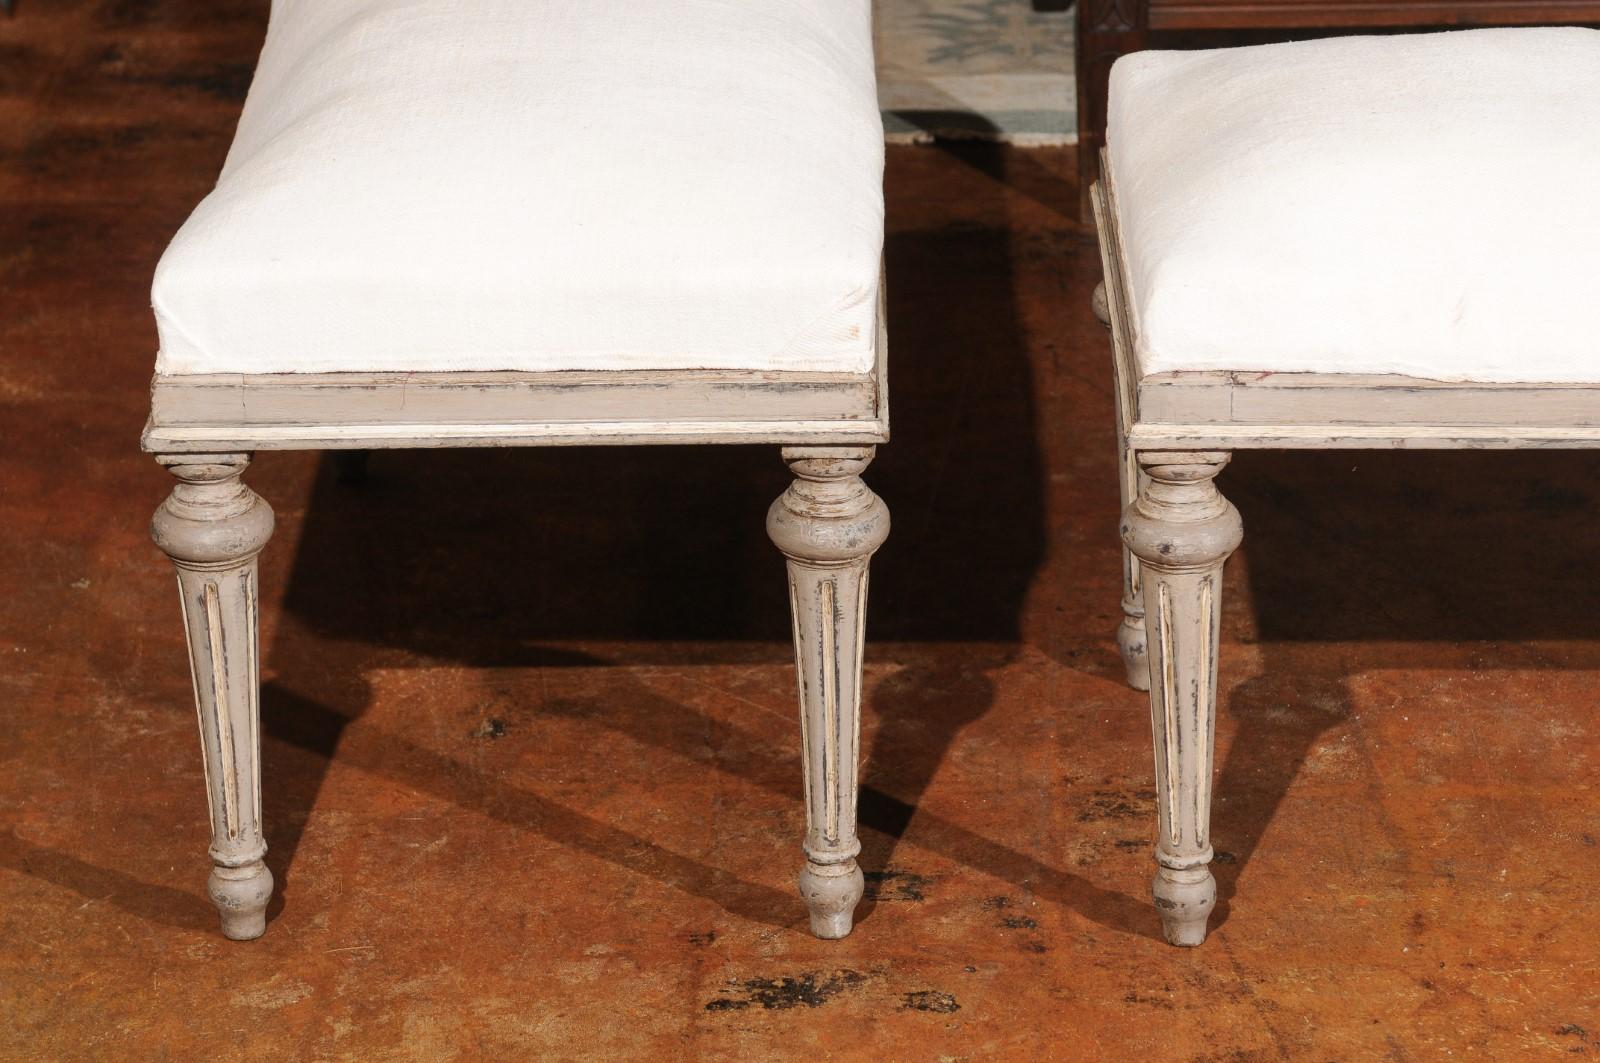  French 19th Century Louis XVI Style Painted Benche with Fluted Legs 3